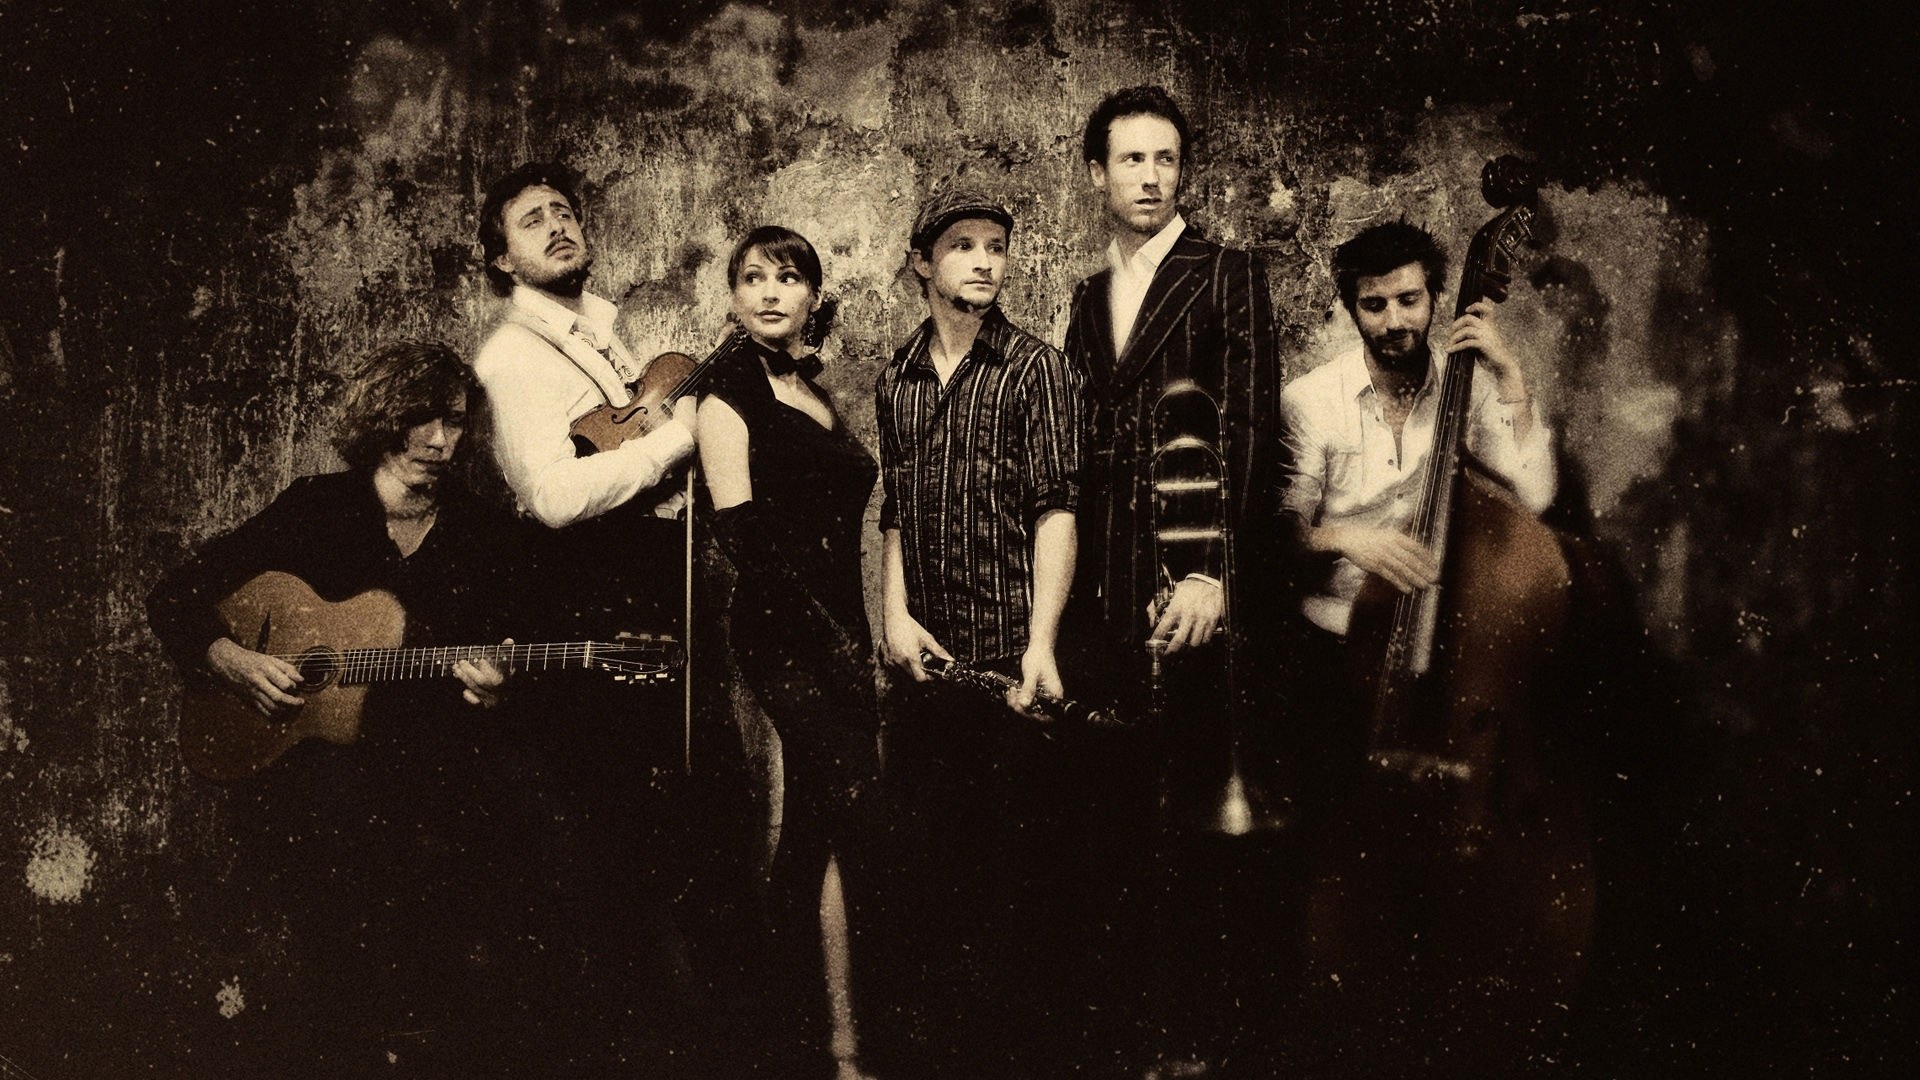 HD Quality Wallpaper | Collection: Music, 1920x1080 Parov Stelar And The Band